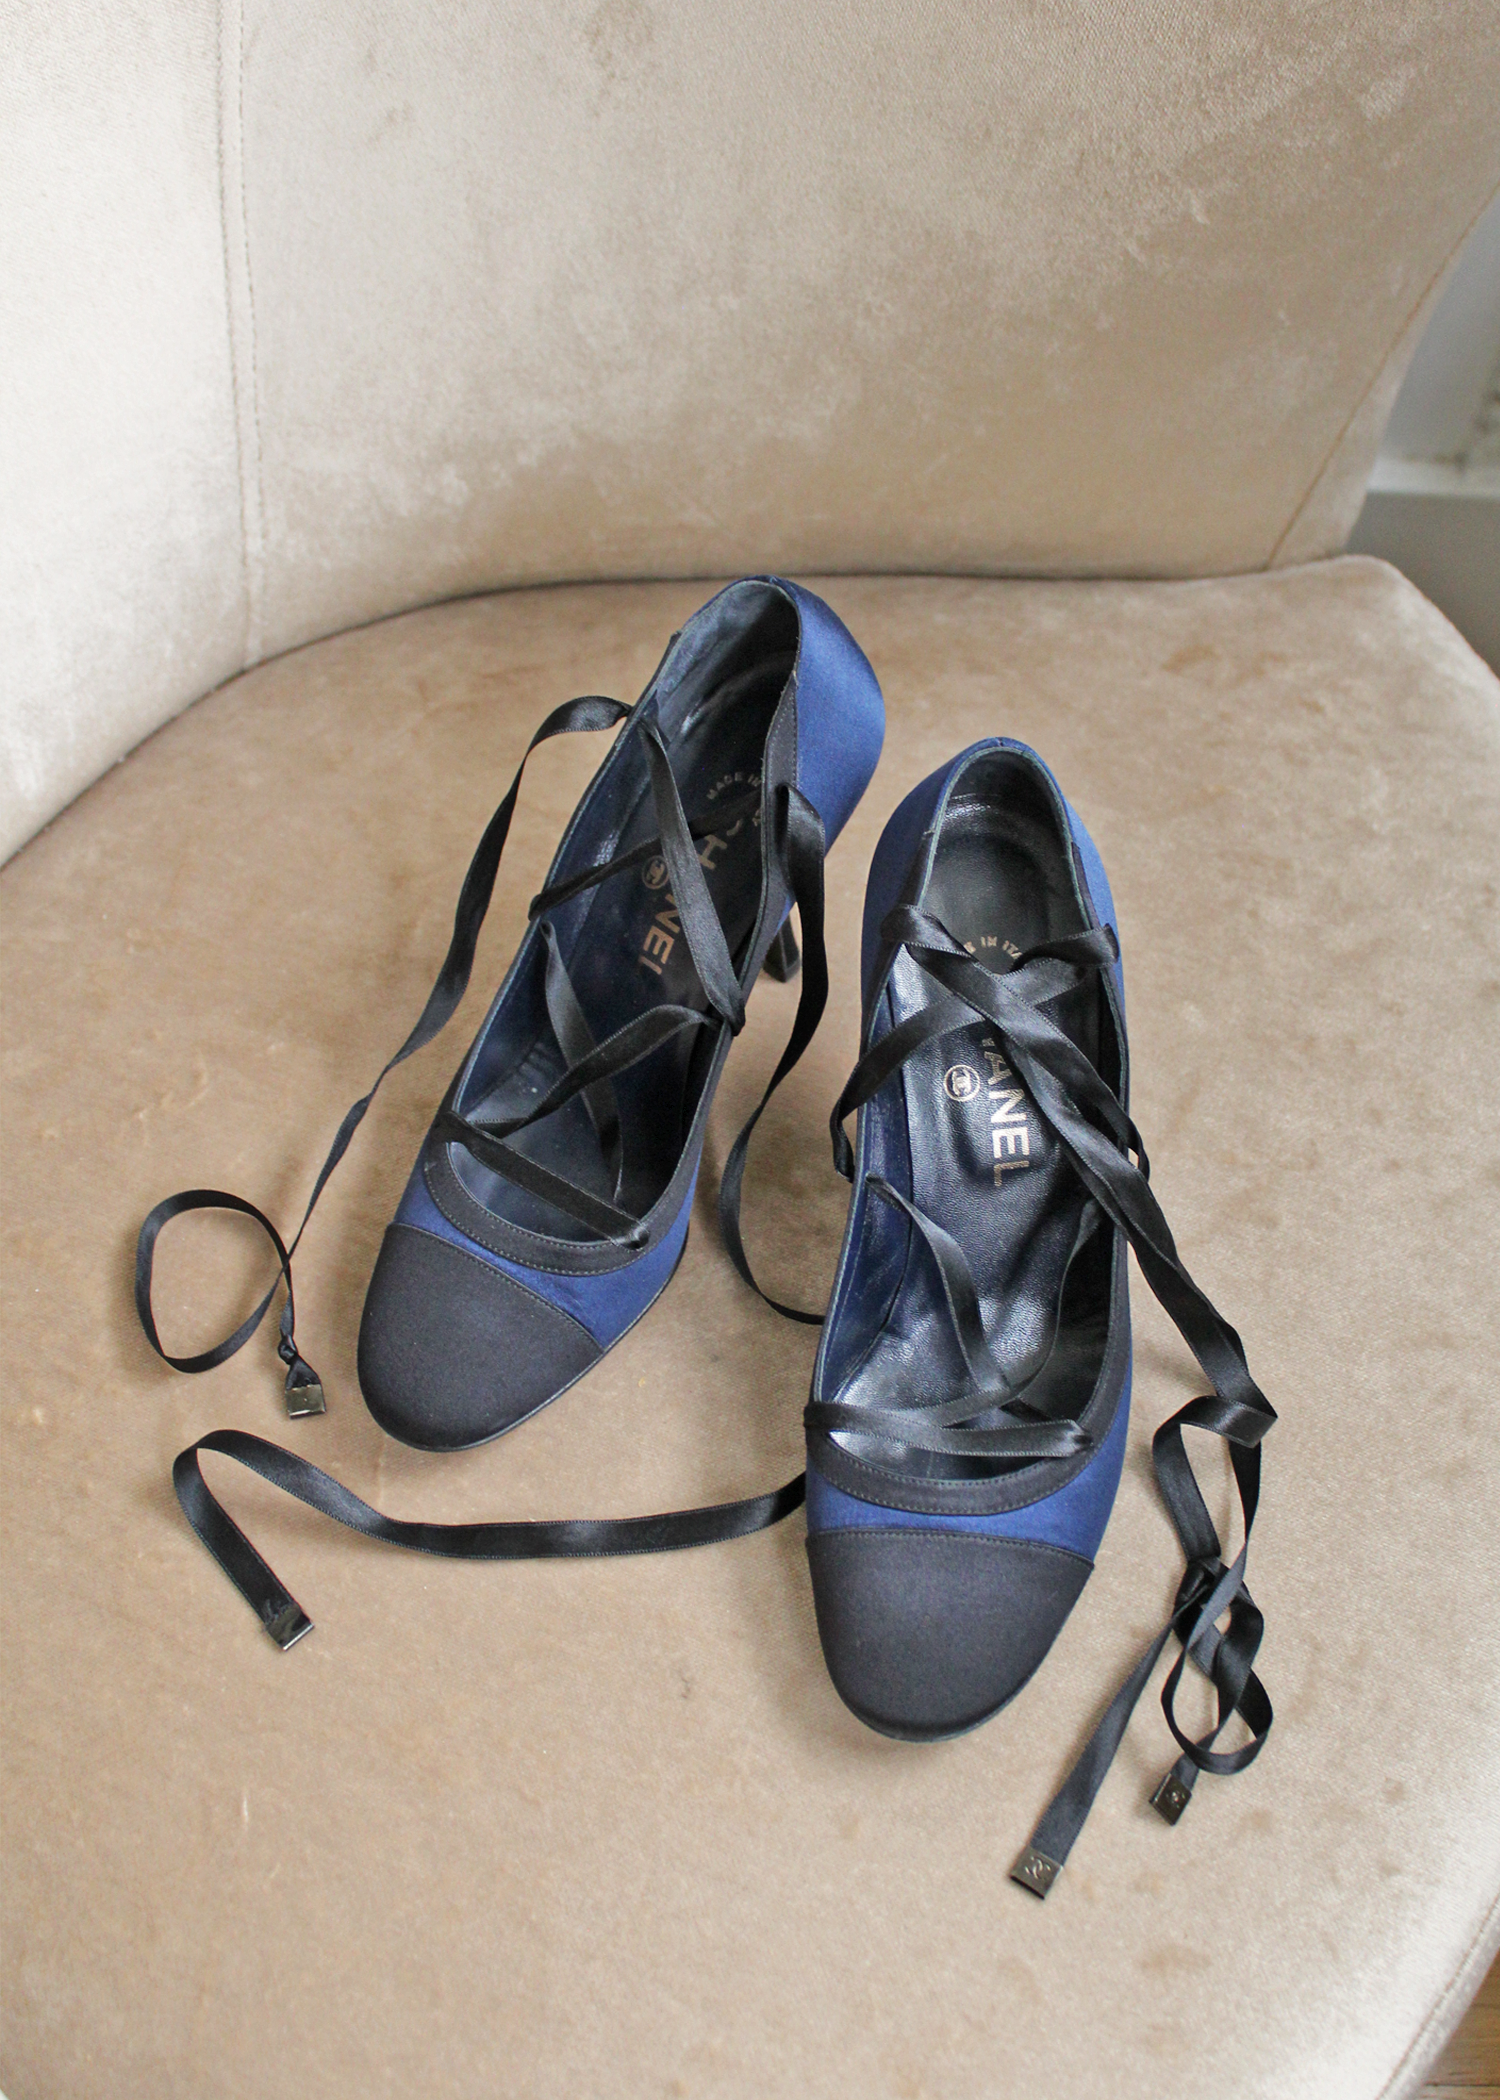 CHANEL 2000s Ballerina Satin Lace-Up Heels in Midnight- Size FR37